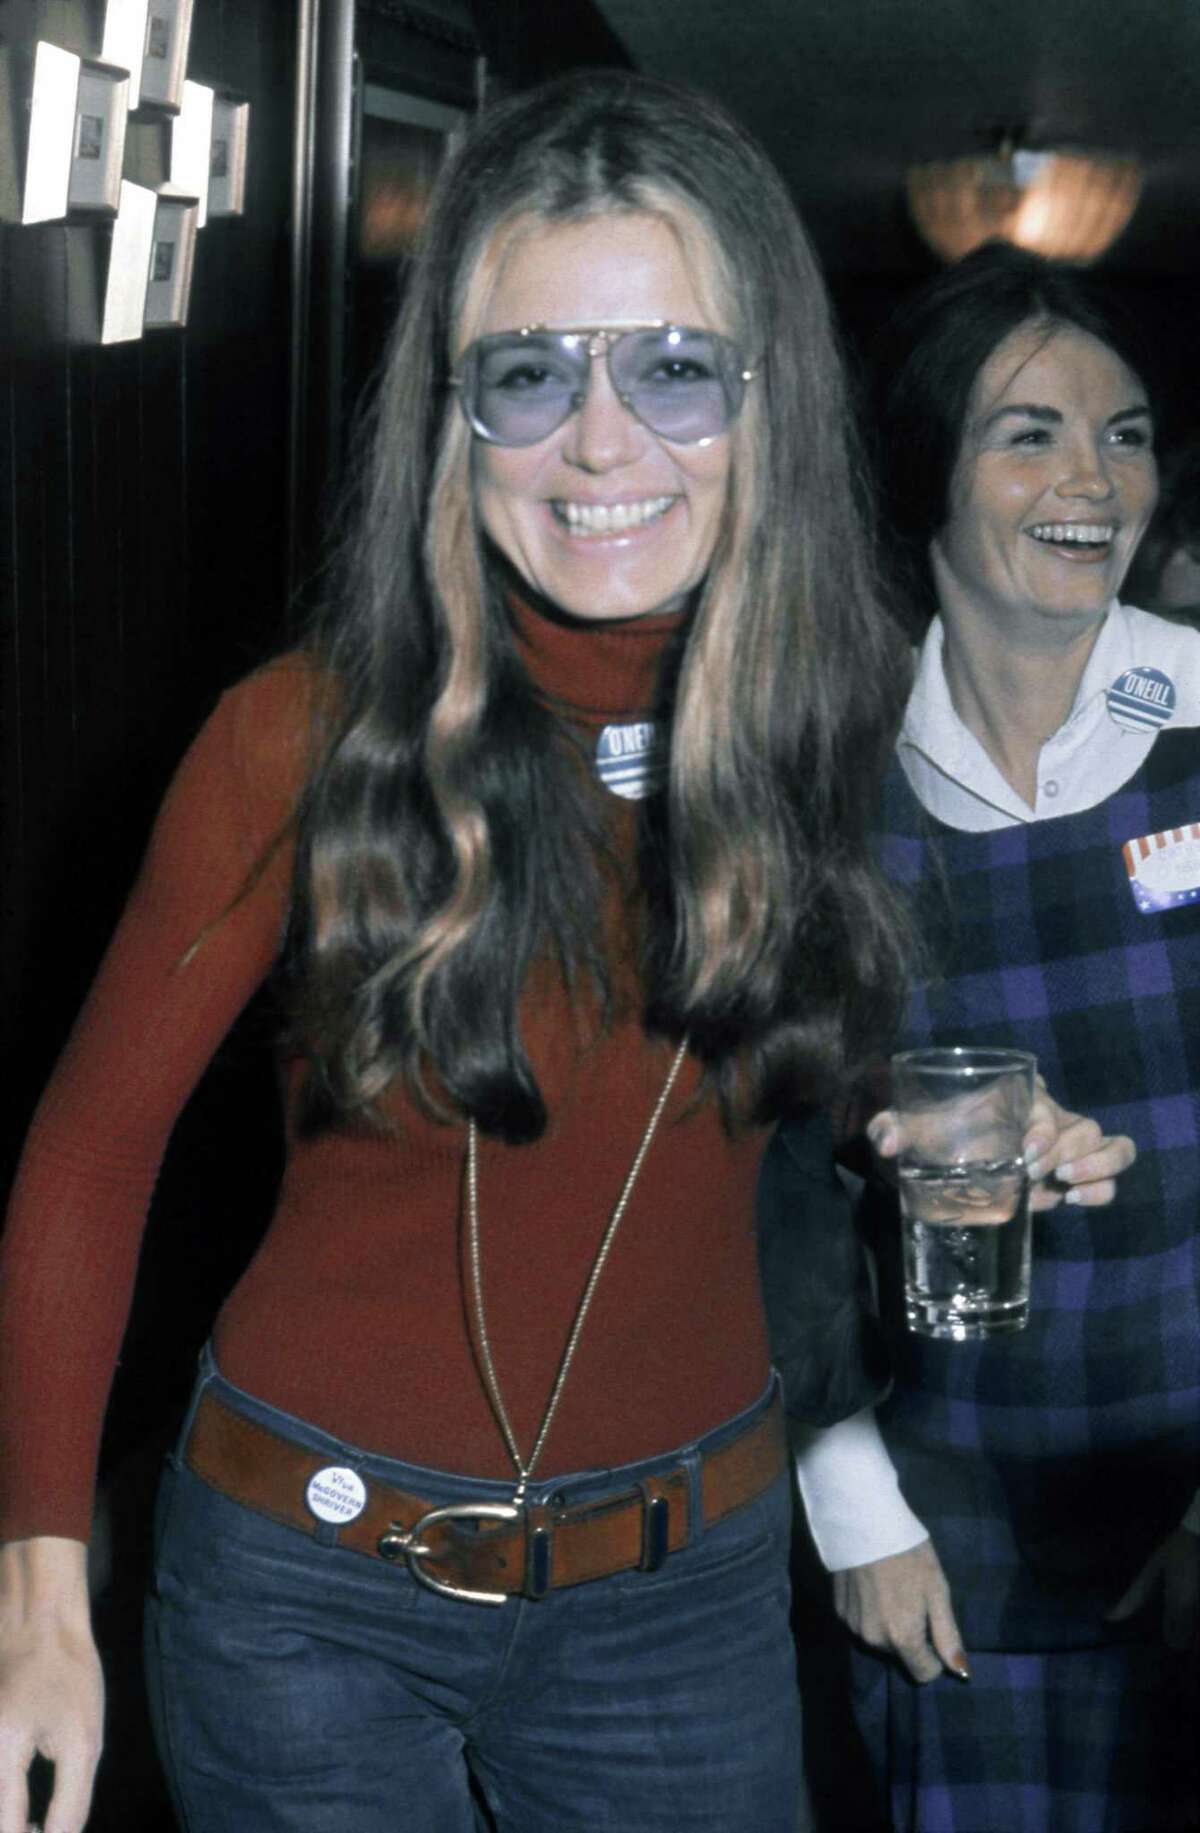 LOS ANGELES - OCTOBER 15: Activist, journalist and leader of the feminist movement Gloria Steinem attends a fundraiser and rally for California State Senate candidate Catherine O'Neill (in Checked dress) at actor Lorne Greene's house on October 15, 1972 in Los Angeles, California. (Photo by Michael Ochs Archives/Getty Images)